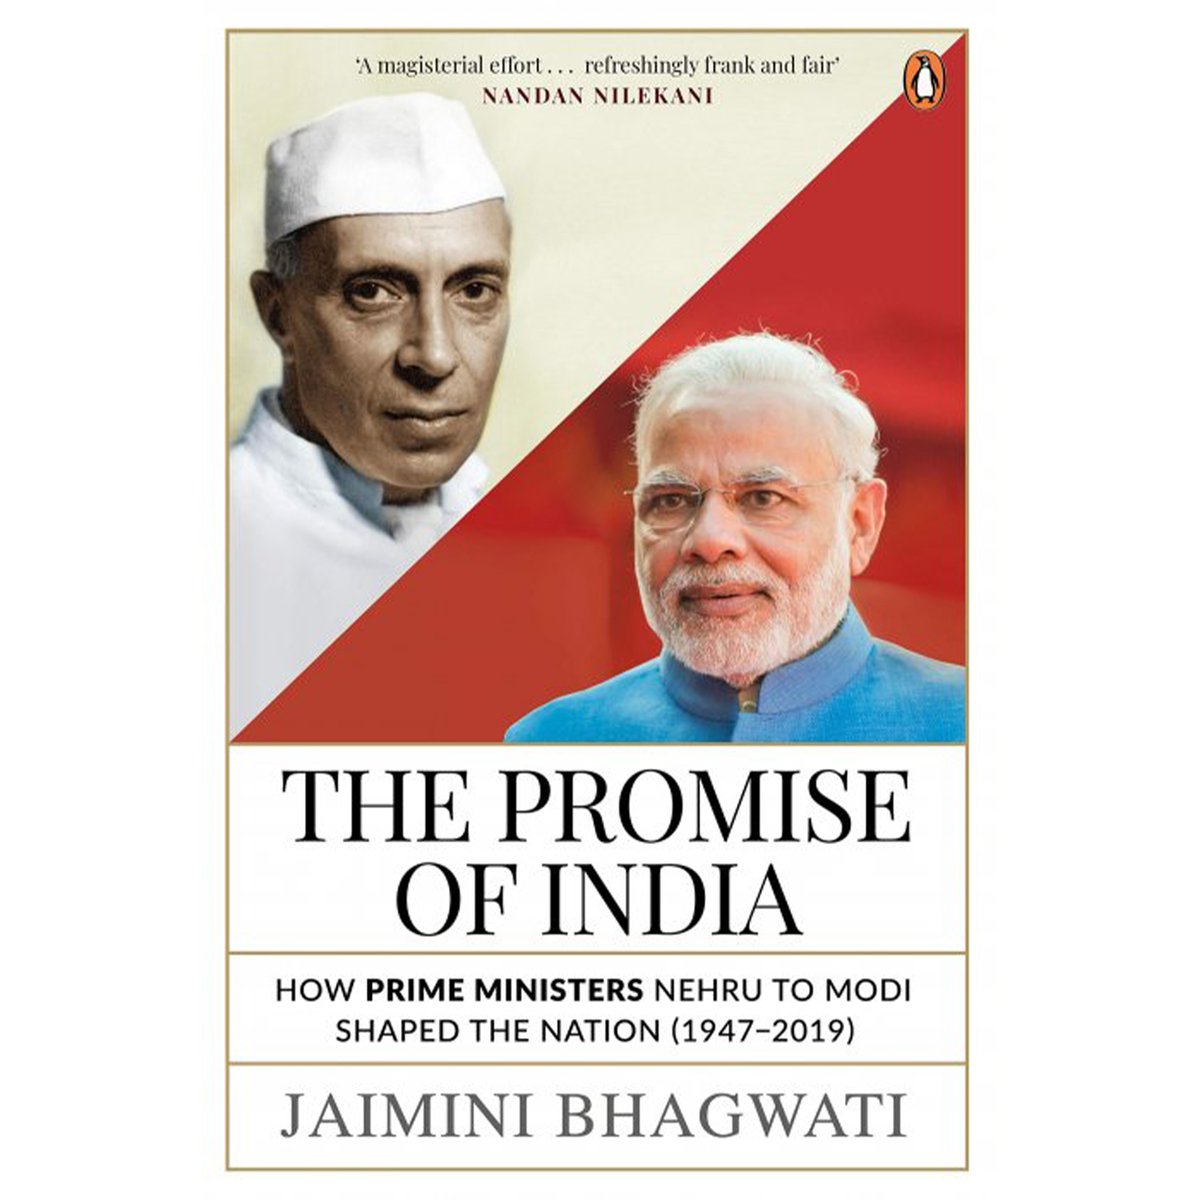 The Promise Of India: How Prime Ministers Nehru To Modi